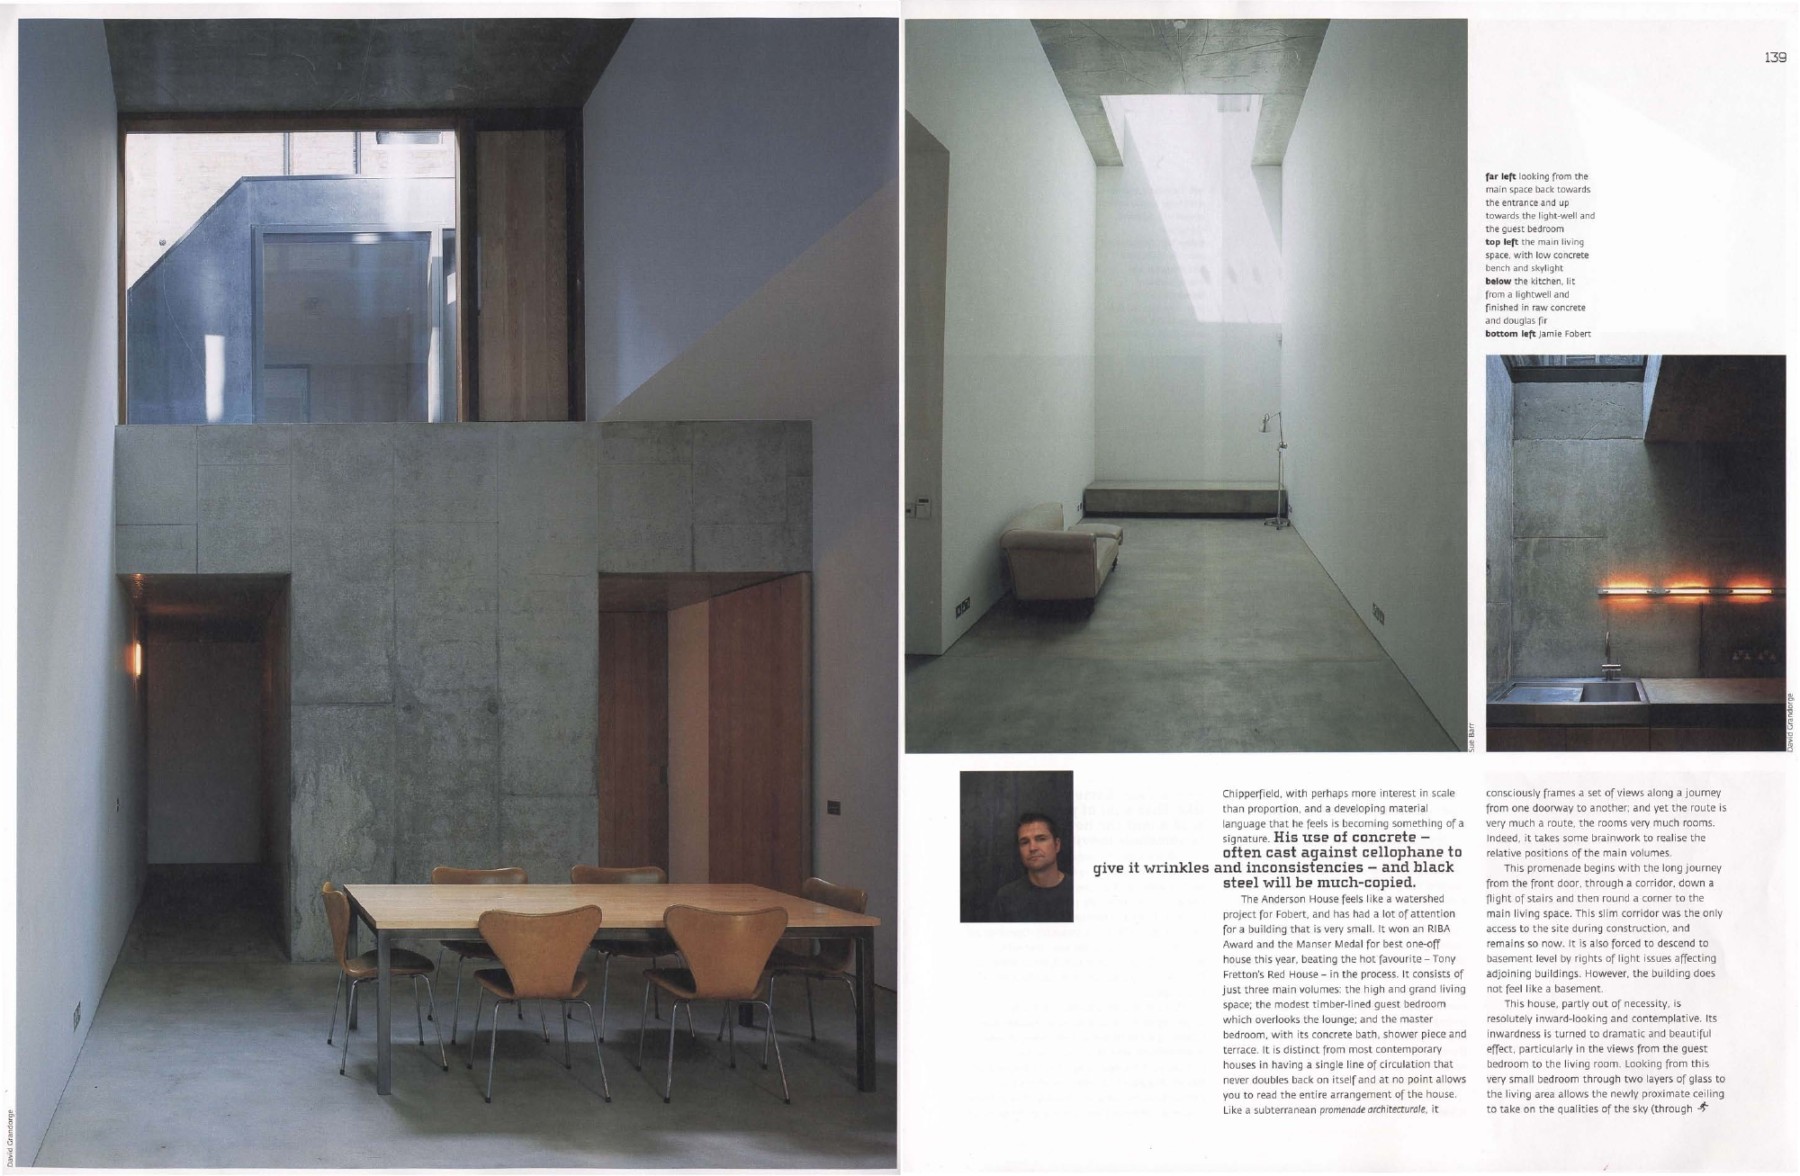 Jamie-Fobert-Architects-Anderson-House-icon-magazine-September-article-press (3)